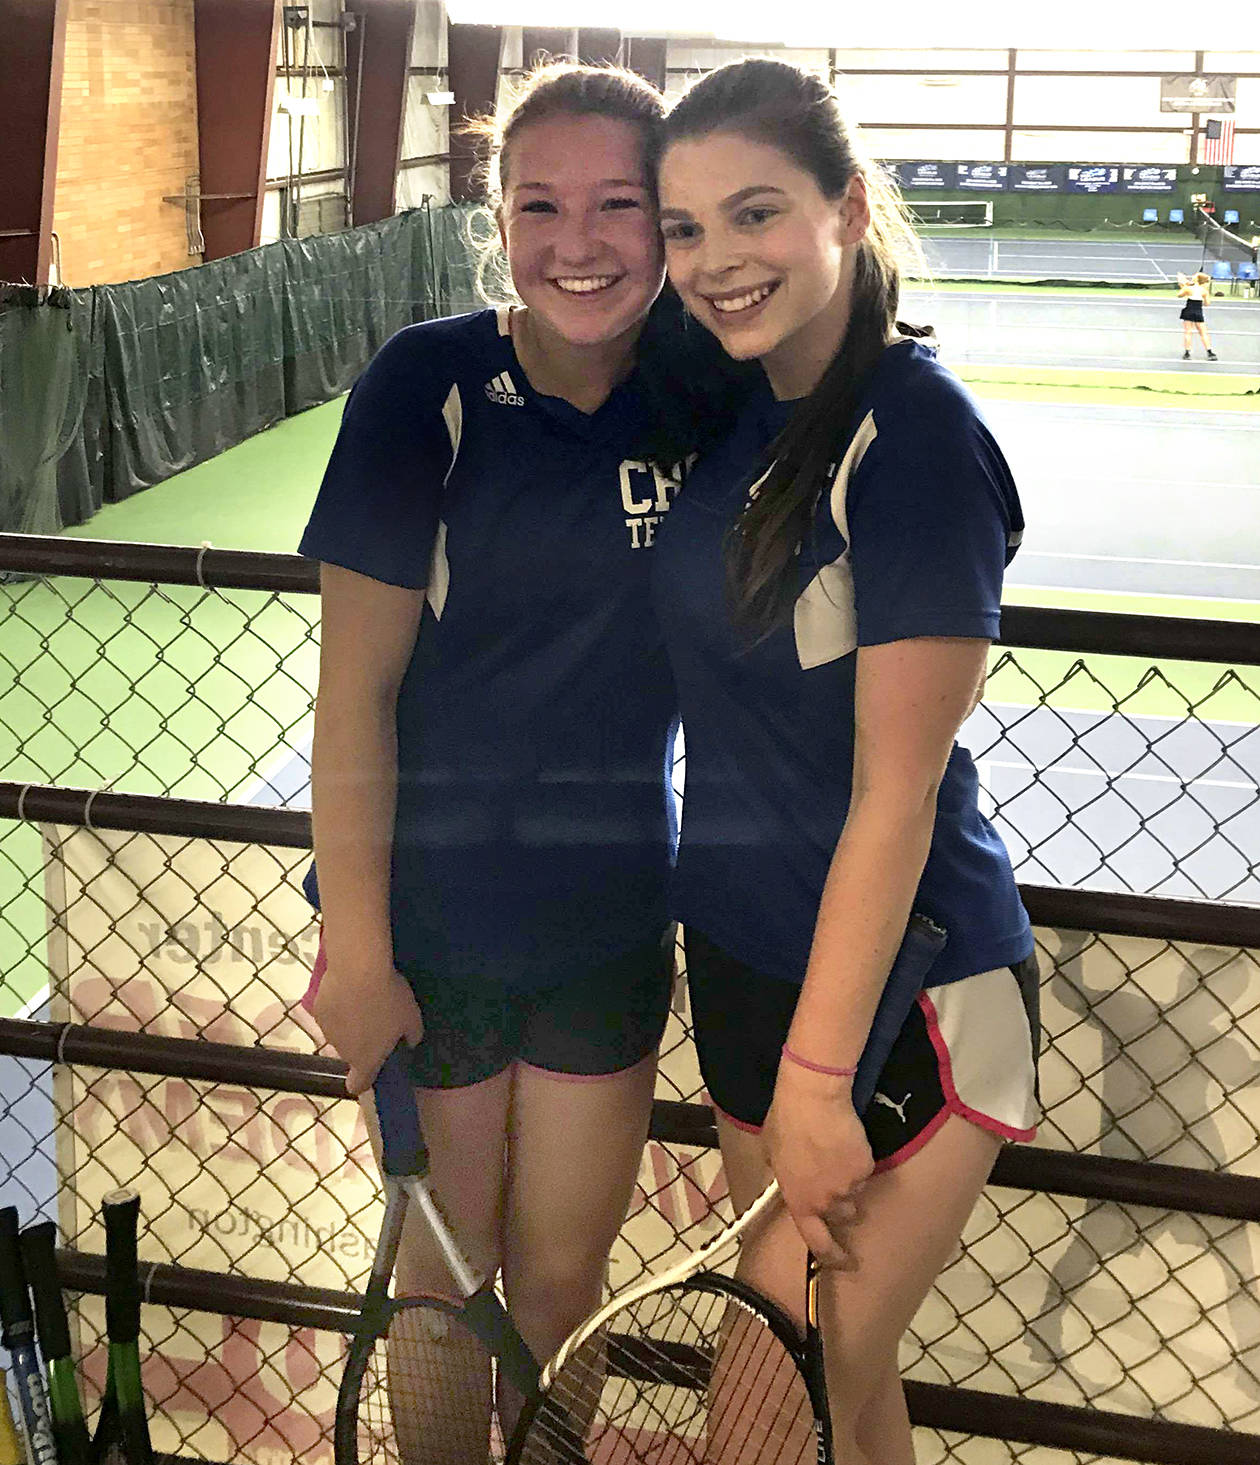 Chimacum girls tennis players Renee Woods, left, and Grace Yaley won the West Central District III 1A doubles championship and will compete at the Class 1A State Girls Tennis Tournament in Yakima next weekend.